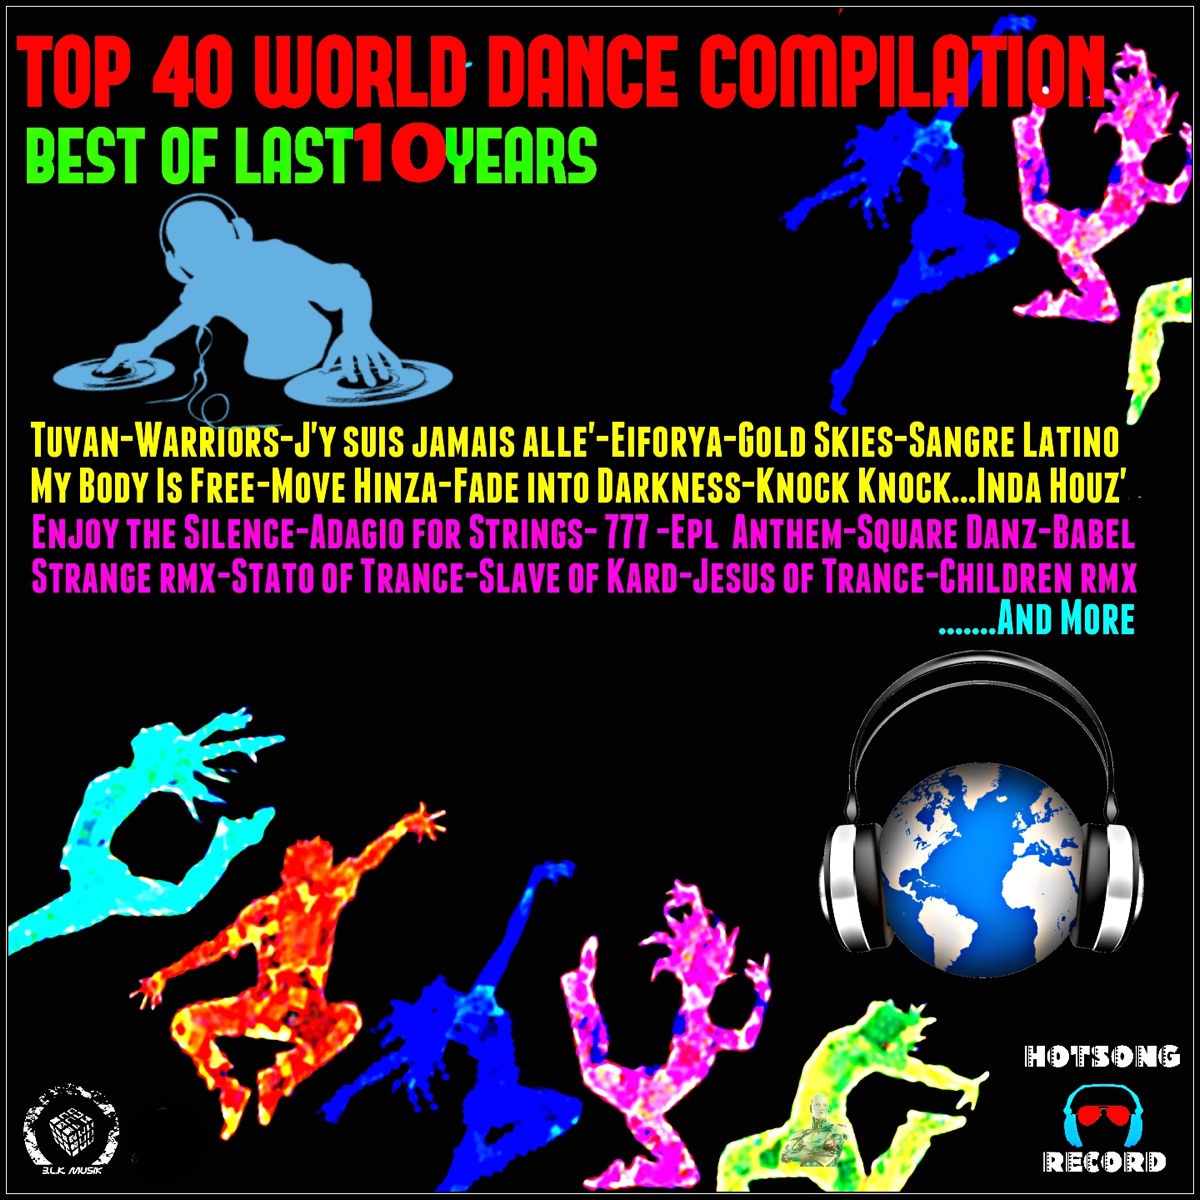 Top 40 World Dance Compilation (Best of Last 10 Years) by Various Artists  on Apple Music